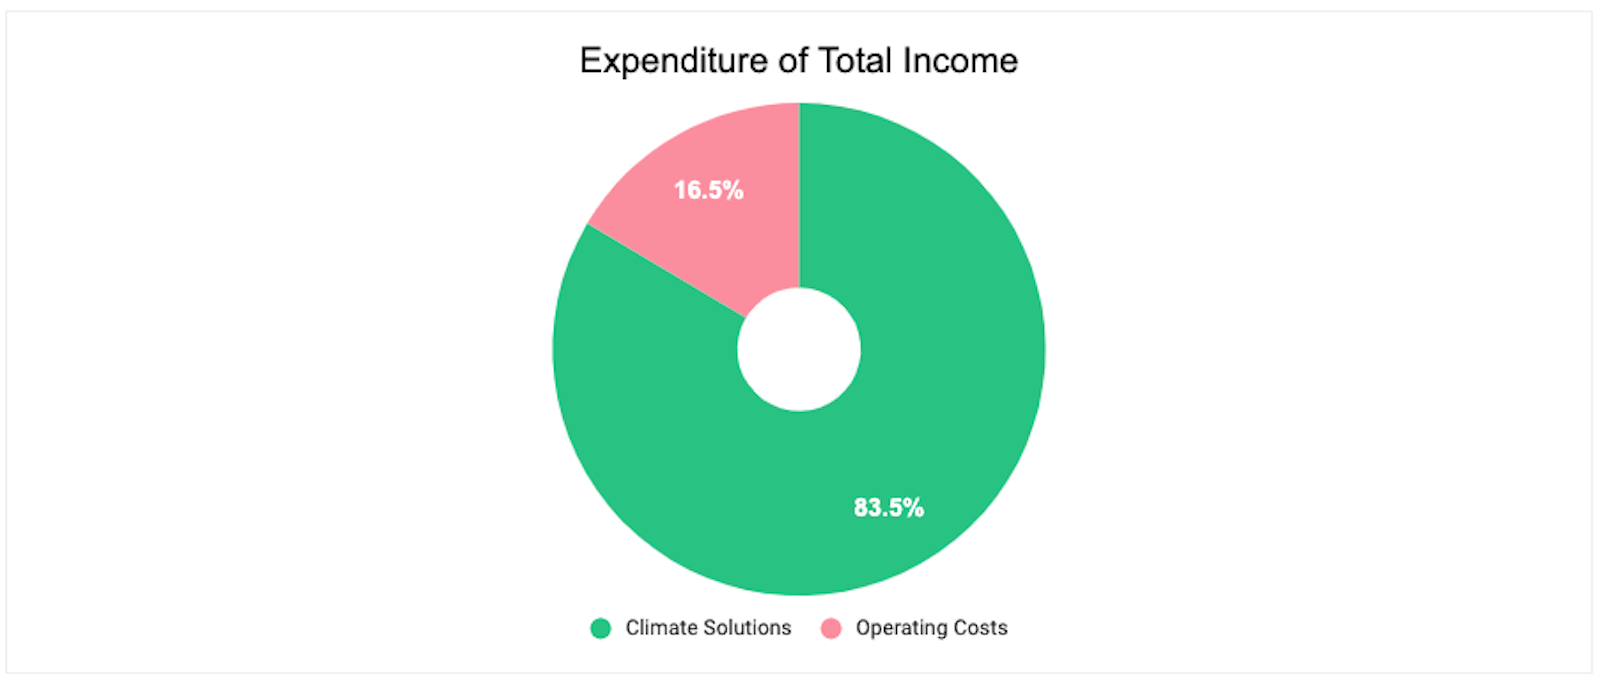 Expenditure as a fraction of total income